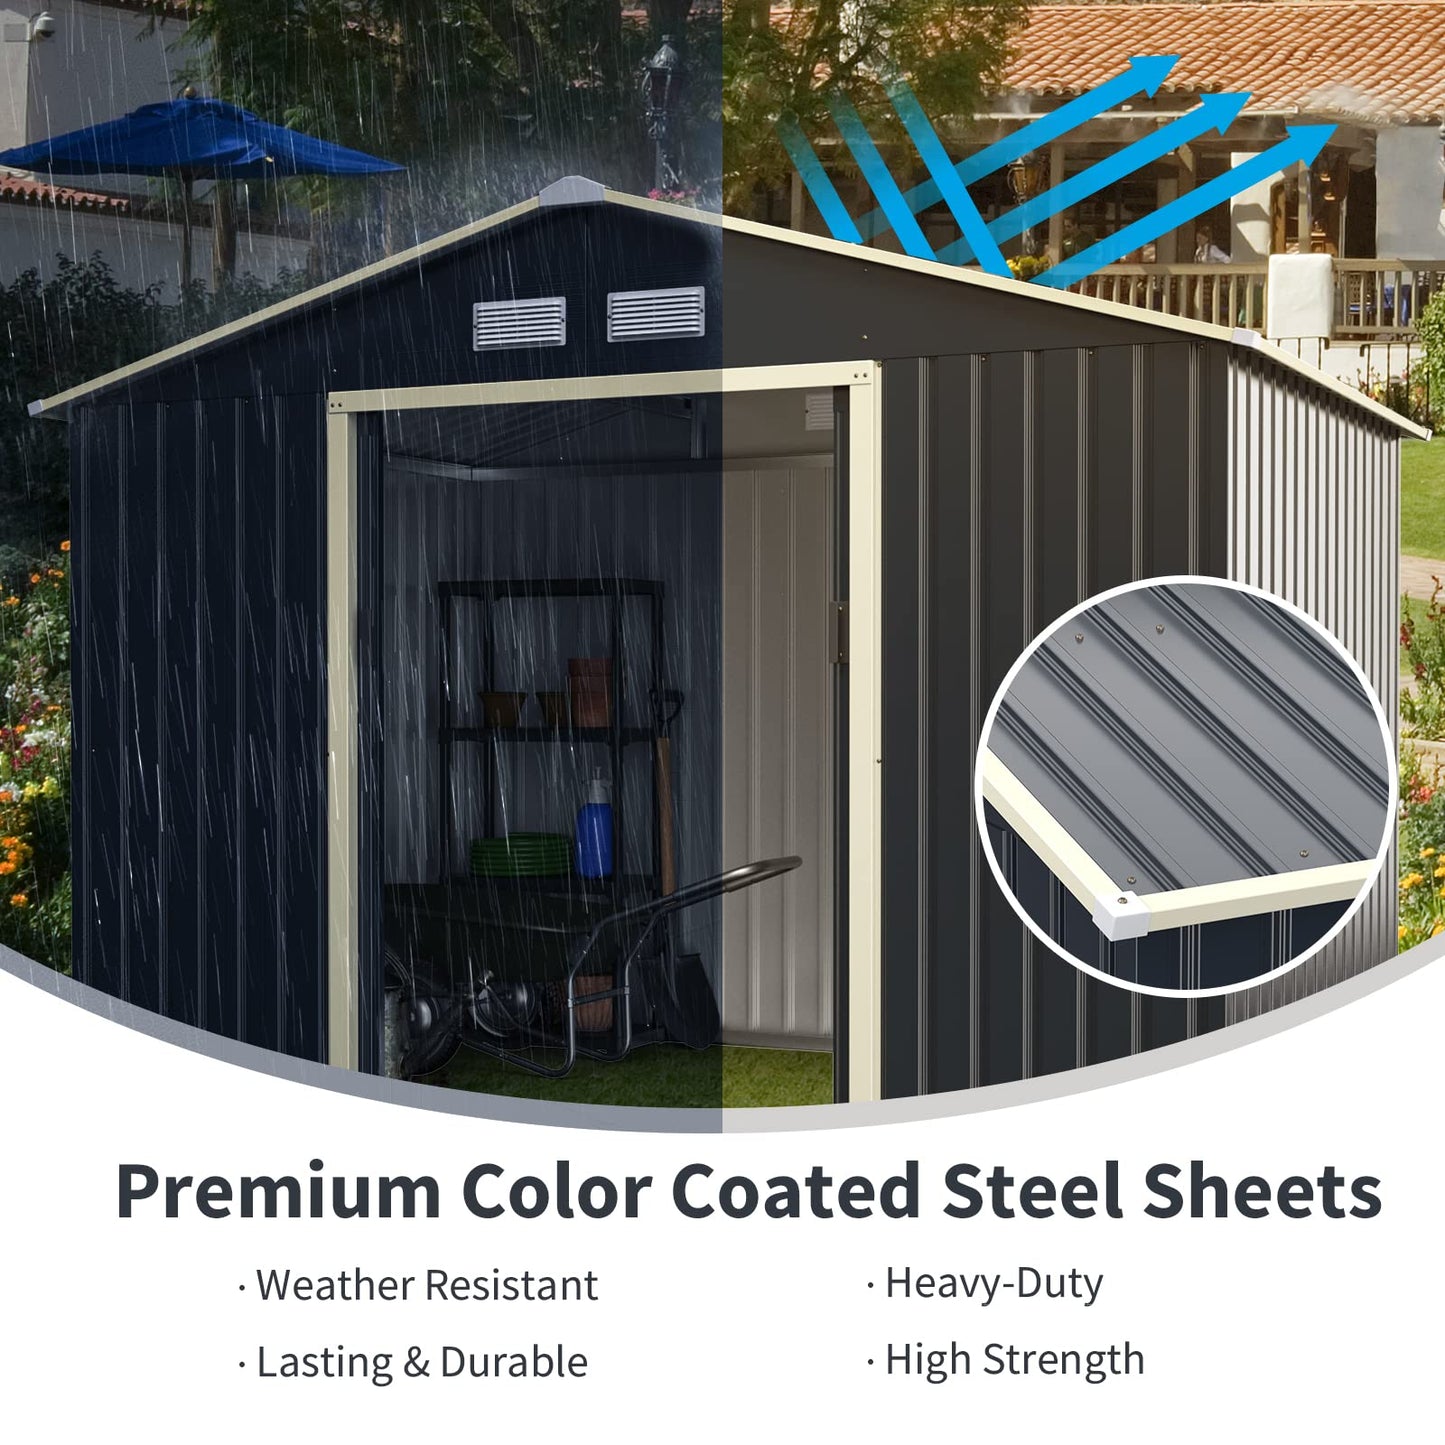 Goplus Outdoor Storage Shed, 9' X 6' Metal Garden Shed with 4 Vents & Double Sliding Door, Utility Tool Shed Storage House for Backyard, Patio, Lawn 9'X6'